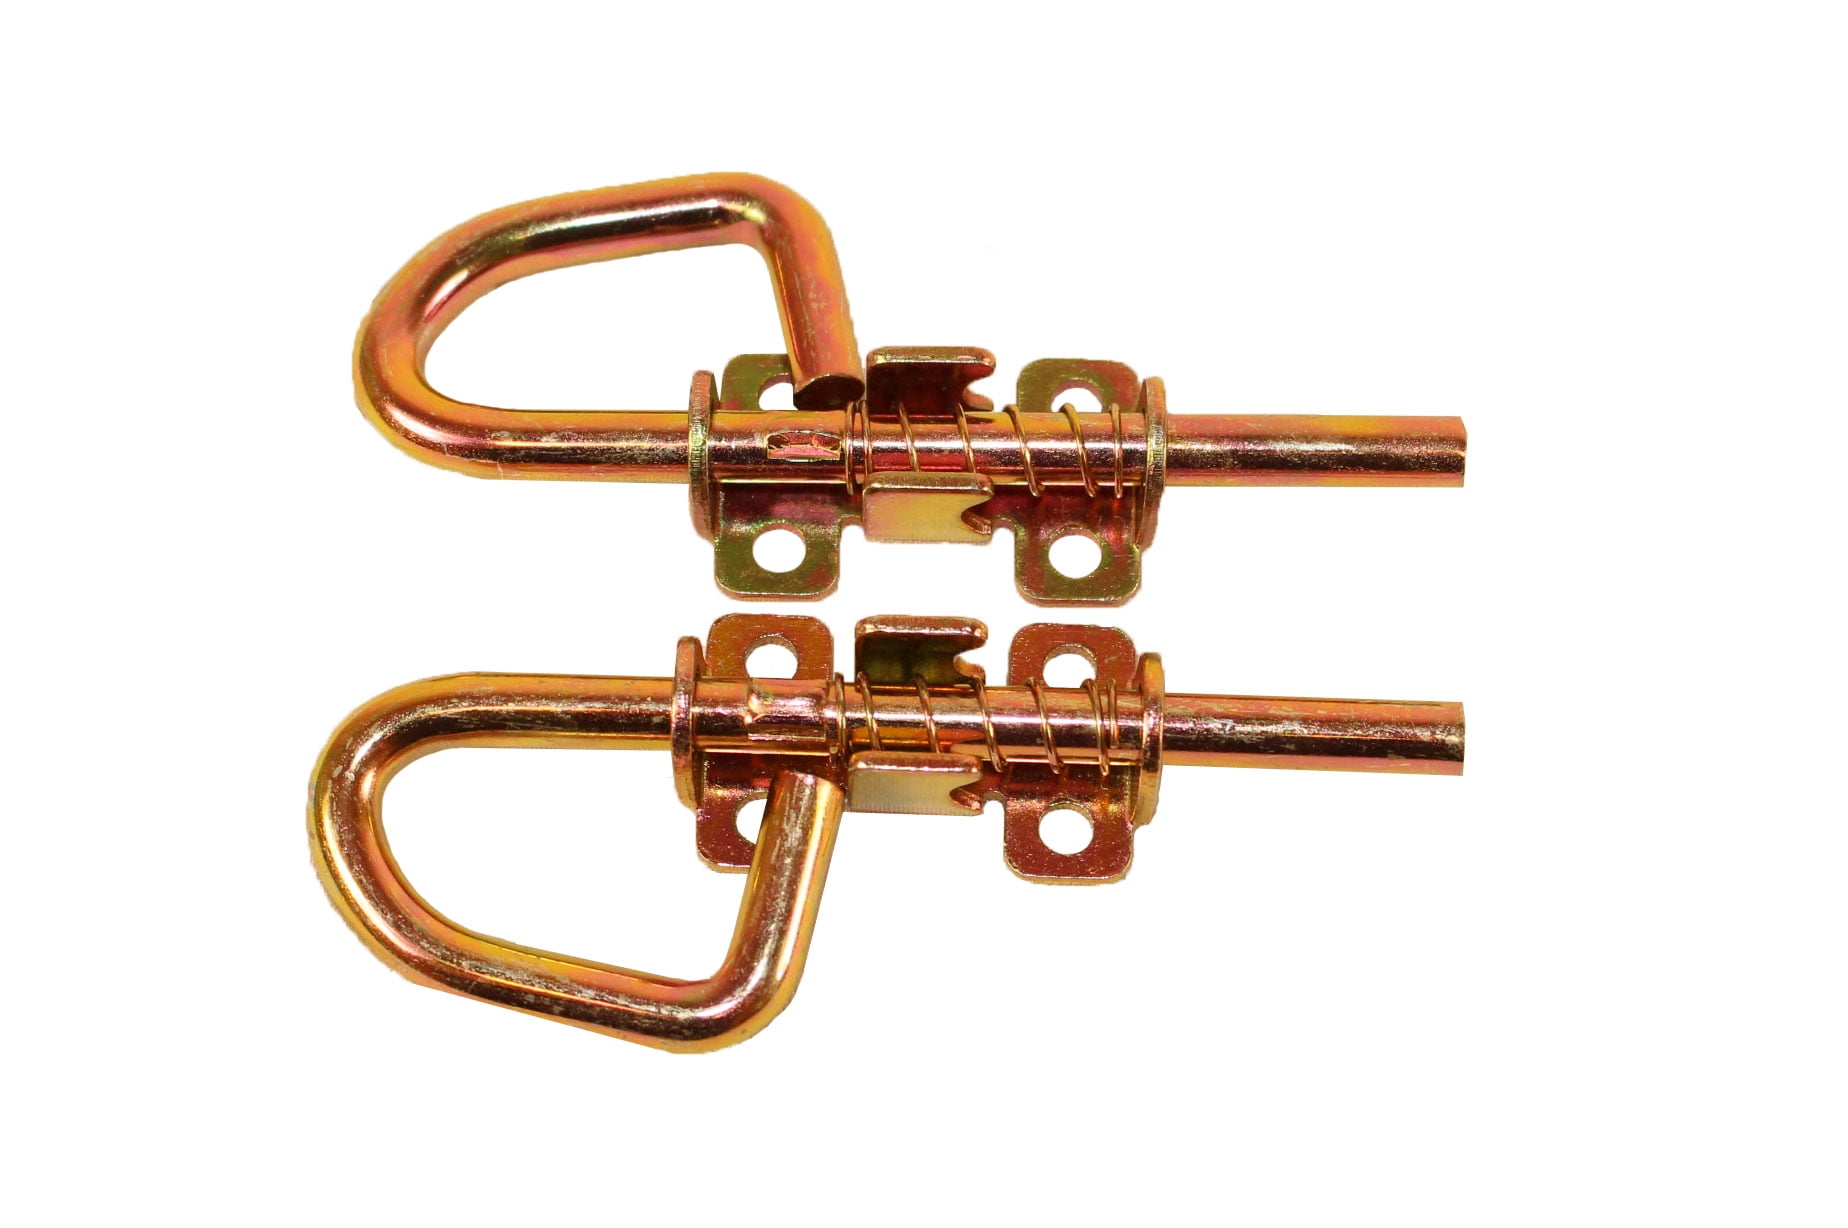 1 pair doors gates Loop Style Spring Locking Barrel Bolts for sheds 